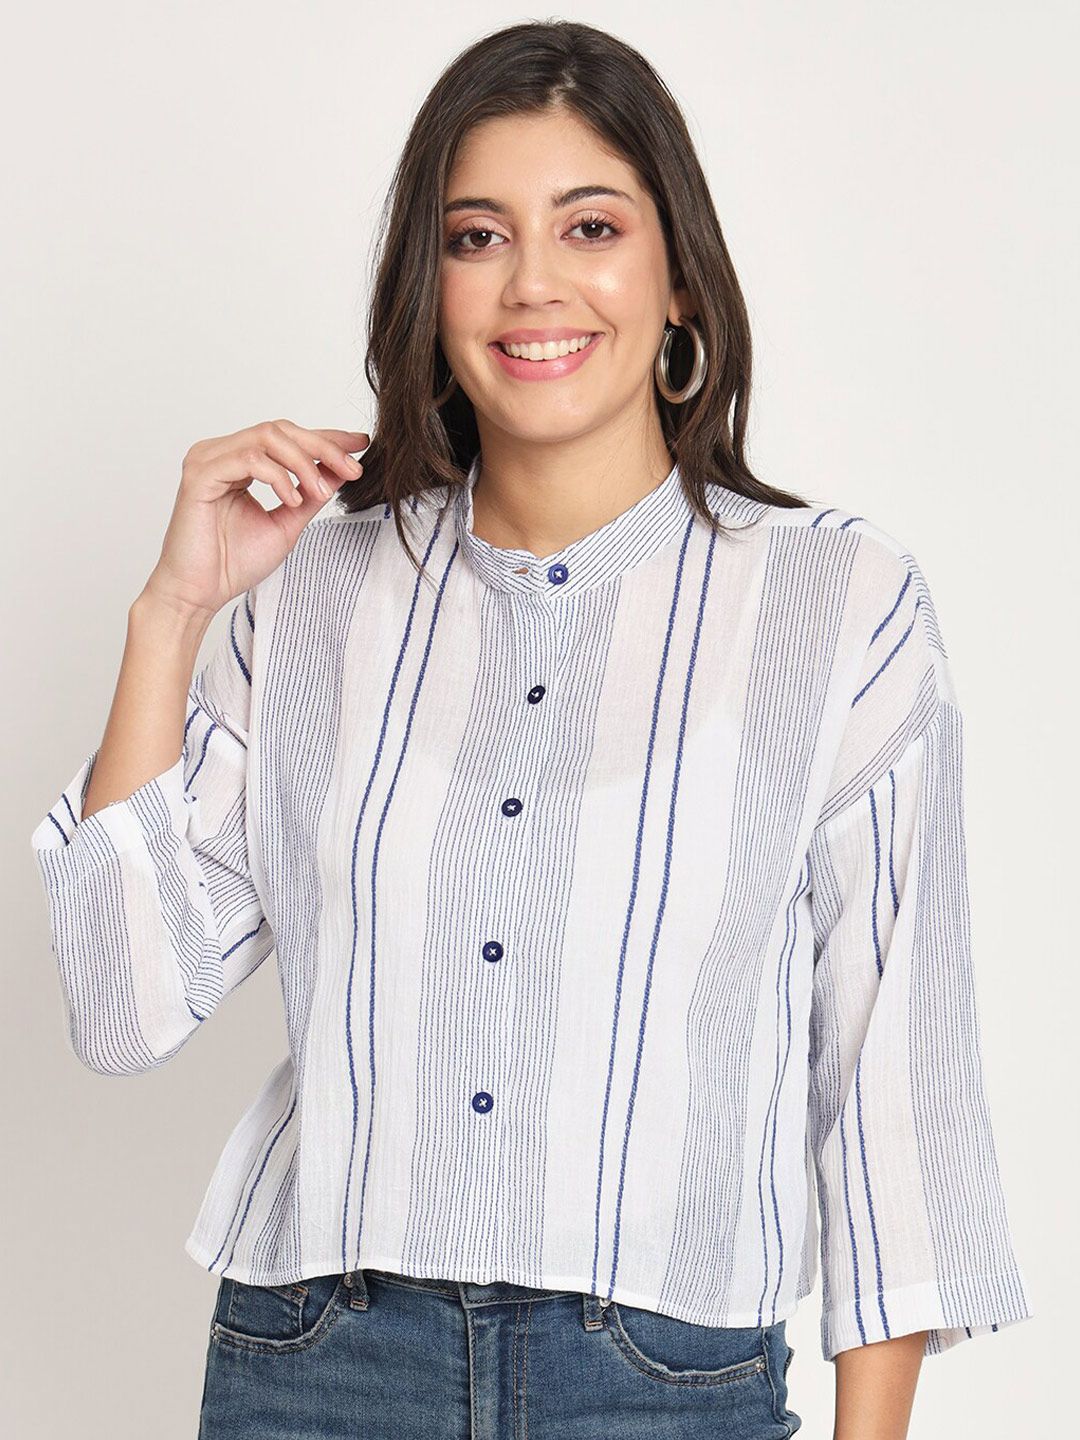 CHARMGAL Striped Band Collar Shirt Style Top Price in India